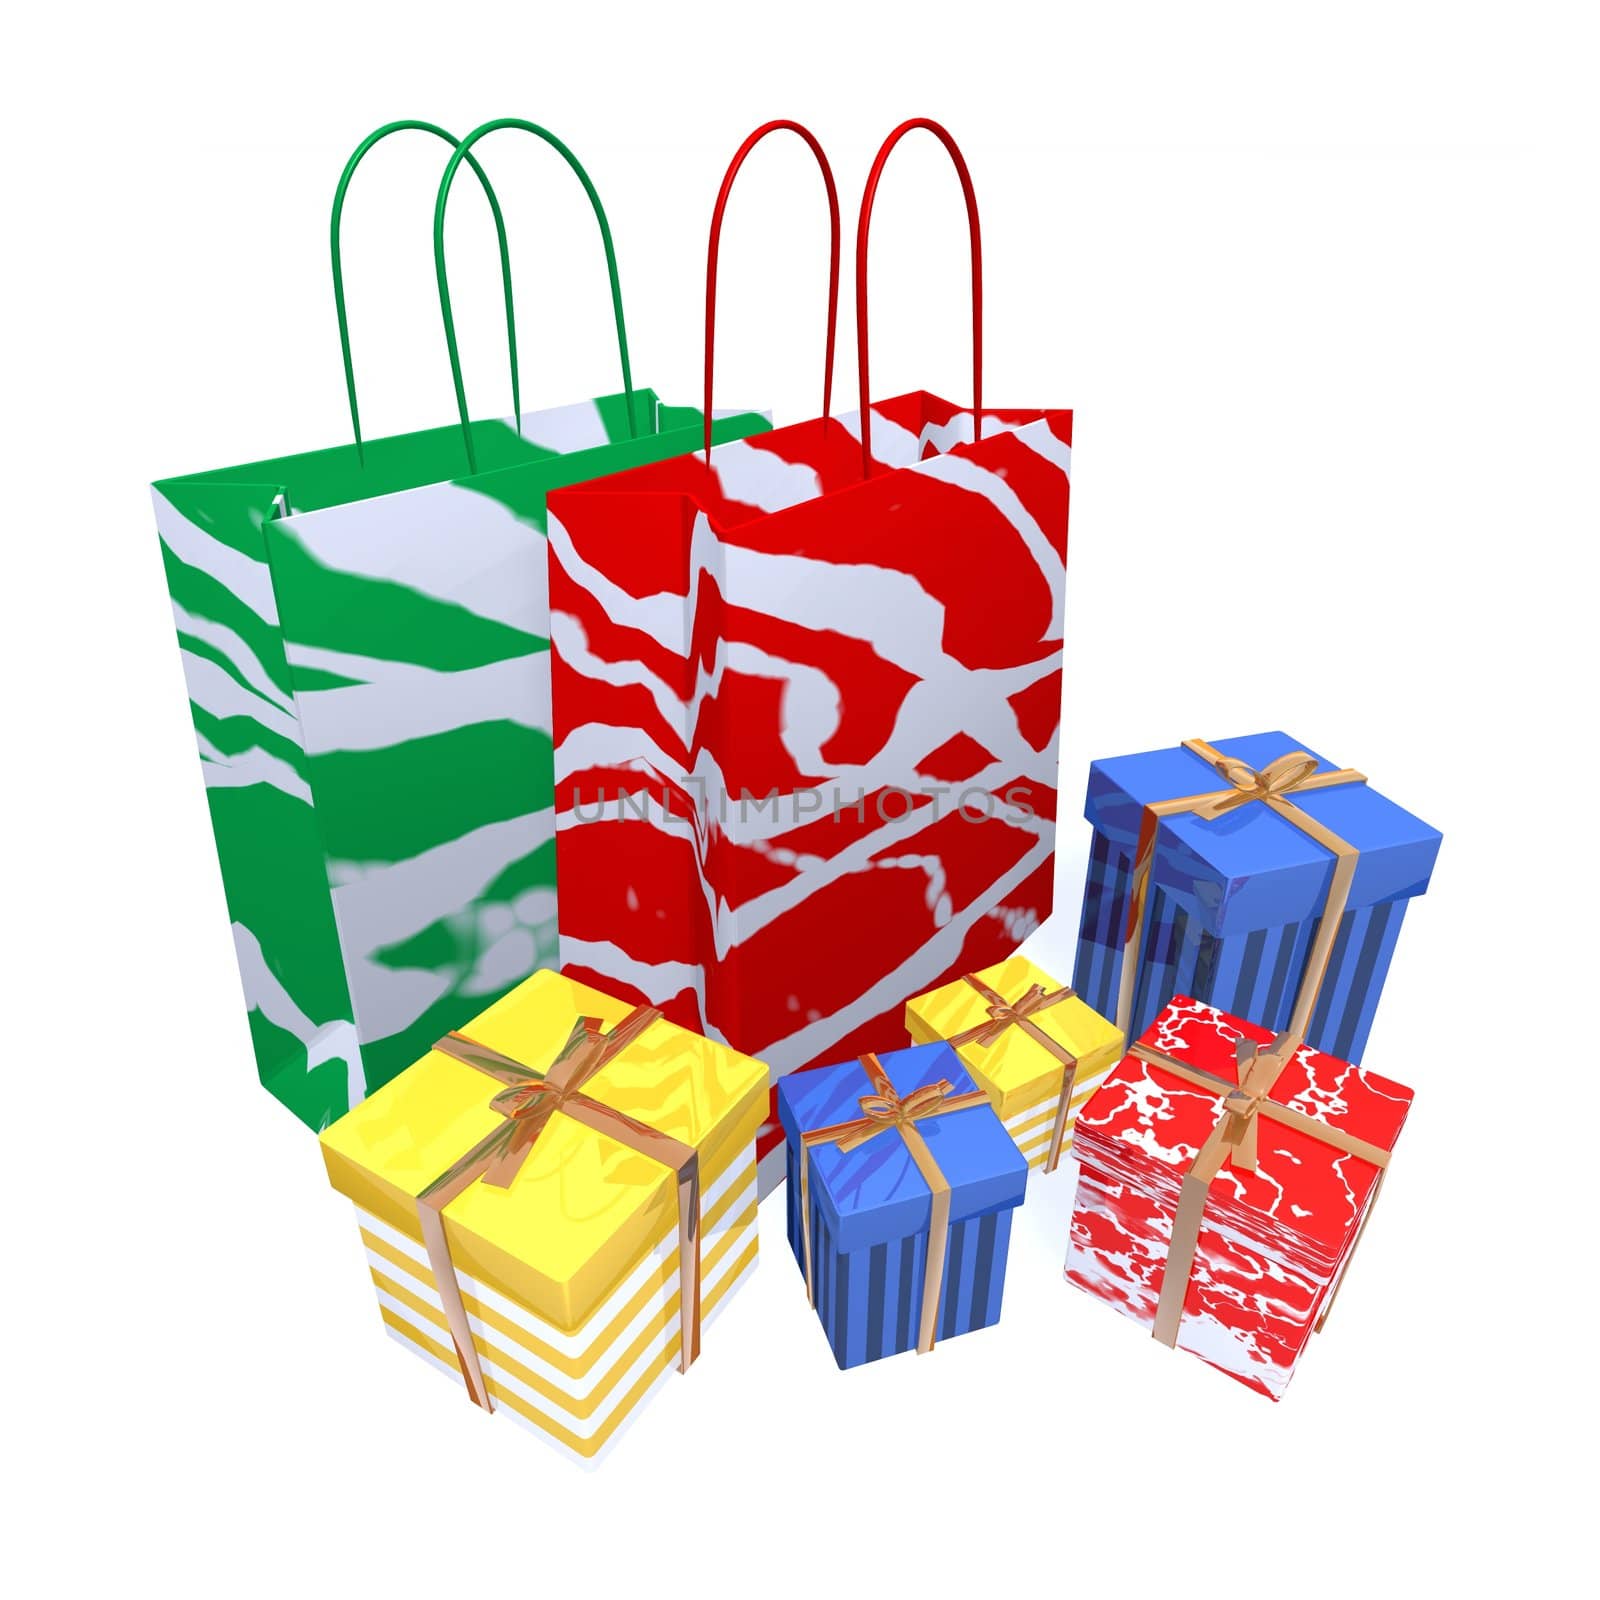 Shopping bags and gifts by jbouzou